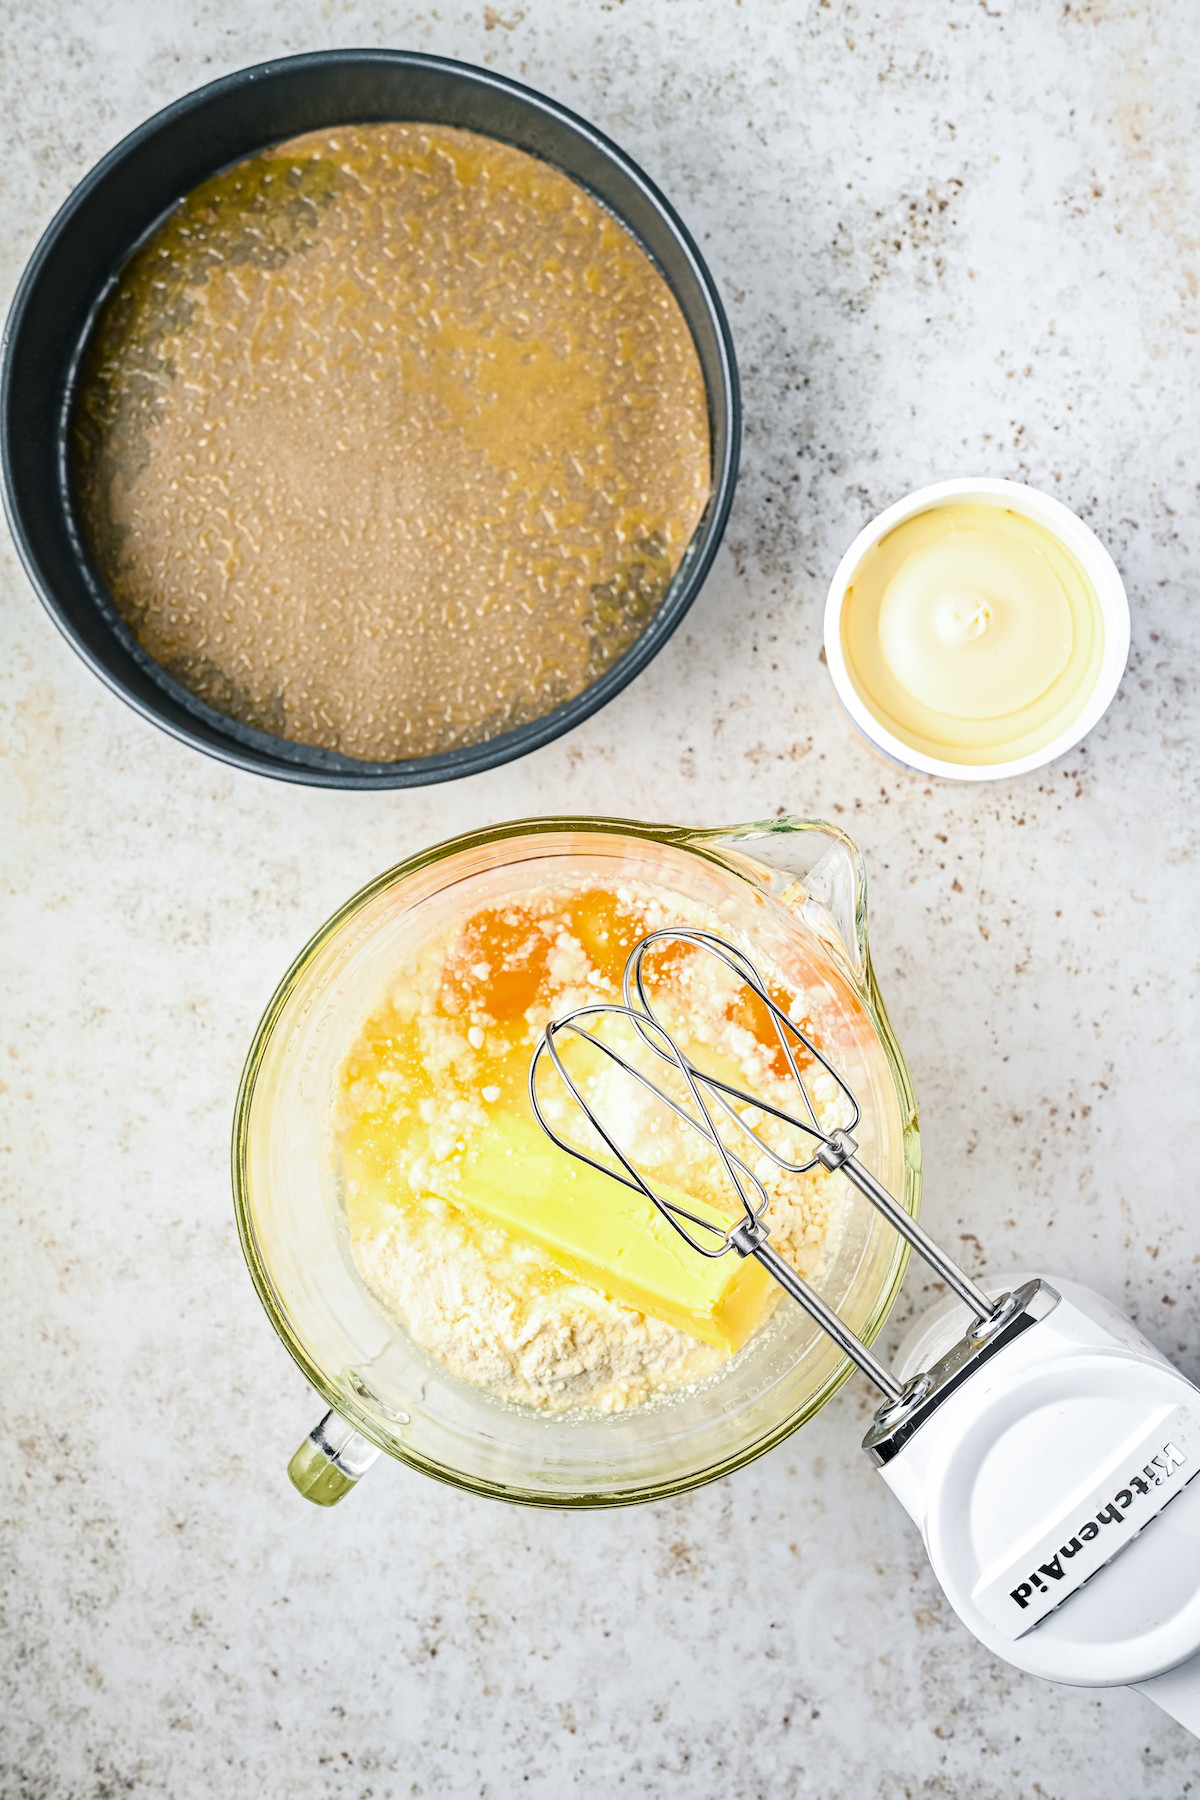 Beating cake mix and other ingredients in a mixing bowl.